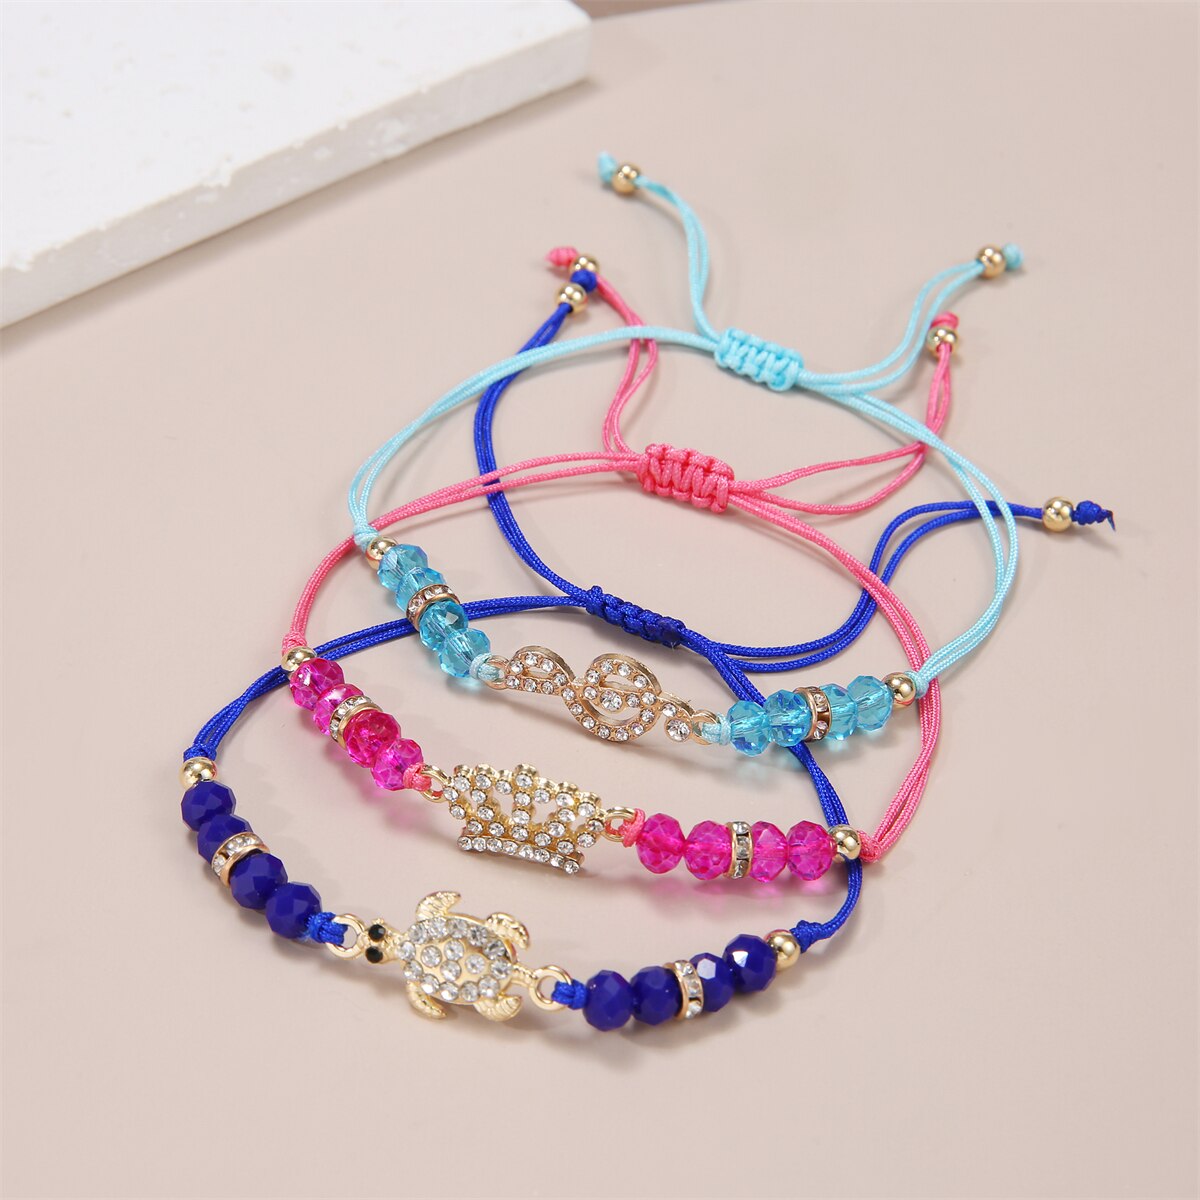 12pcs/lot Butterfly Turtle Charms Knitted Bracelet for Women Adjustable Infinite Love Crystal Beads Bracelets Anklet Jewelry